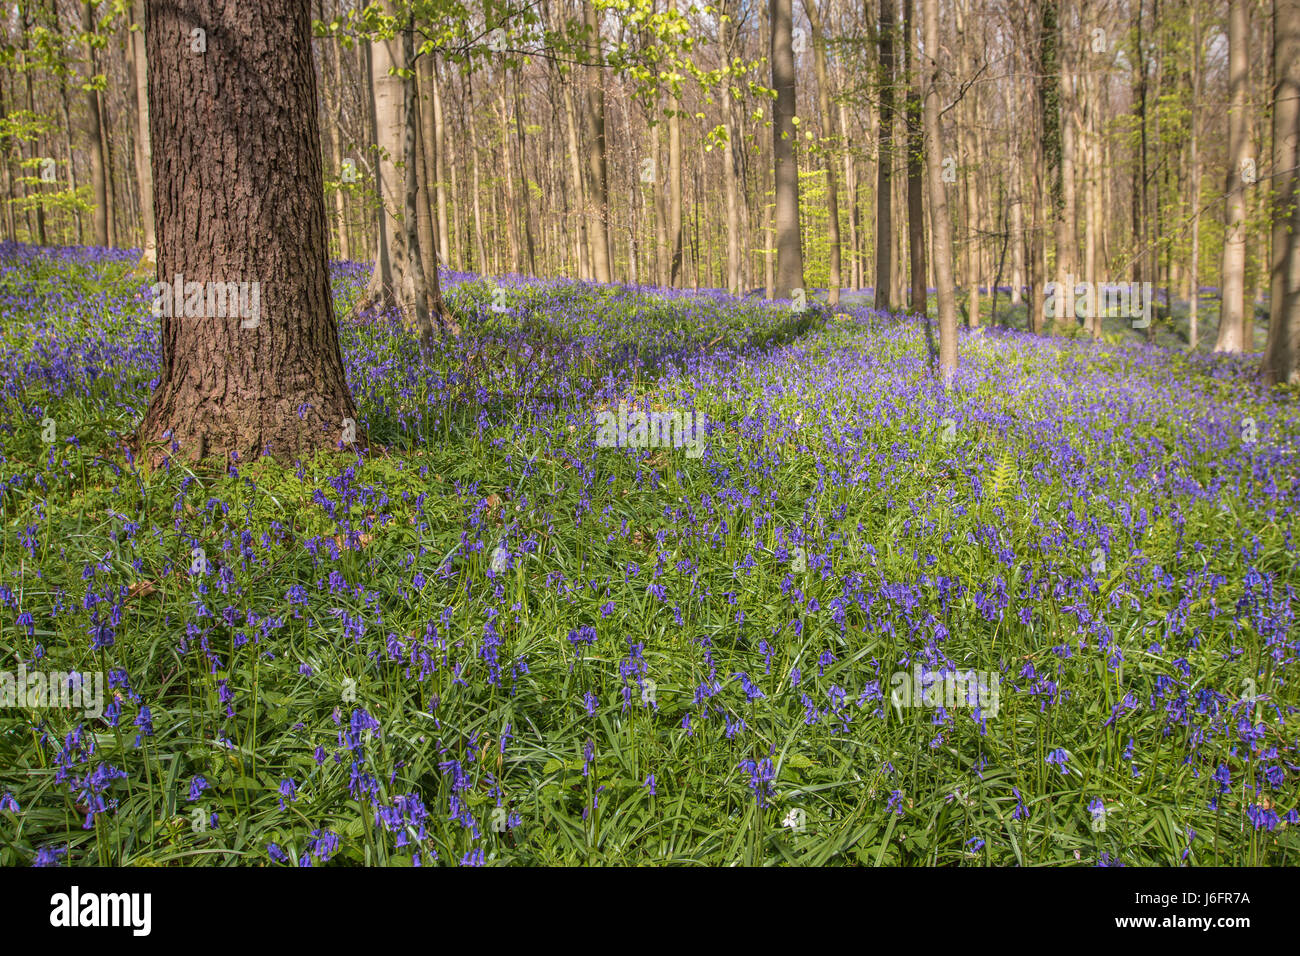 Blue Bell Woods Stock Photos & Blue Bell Woods Stock Images - Alamy